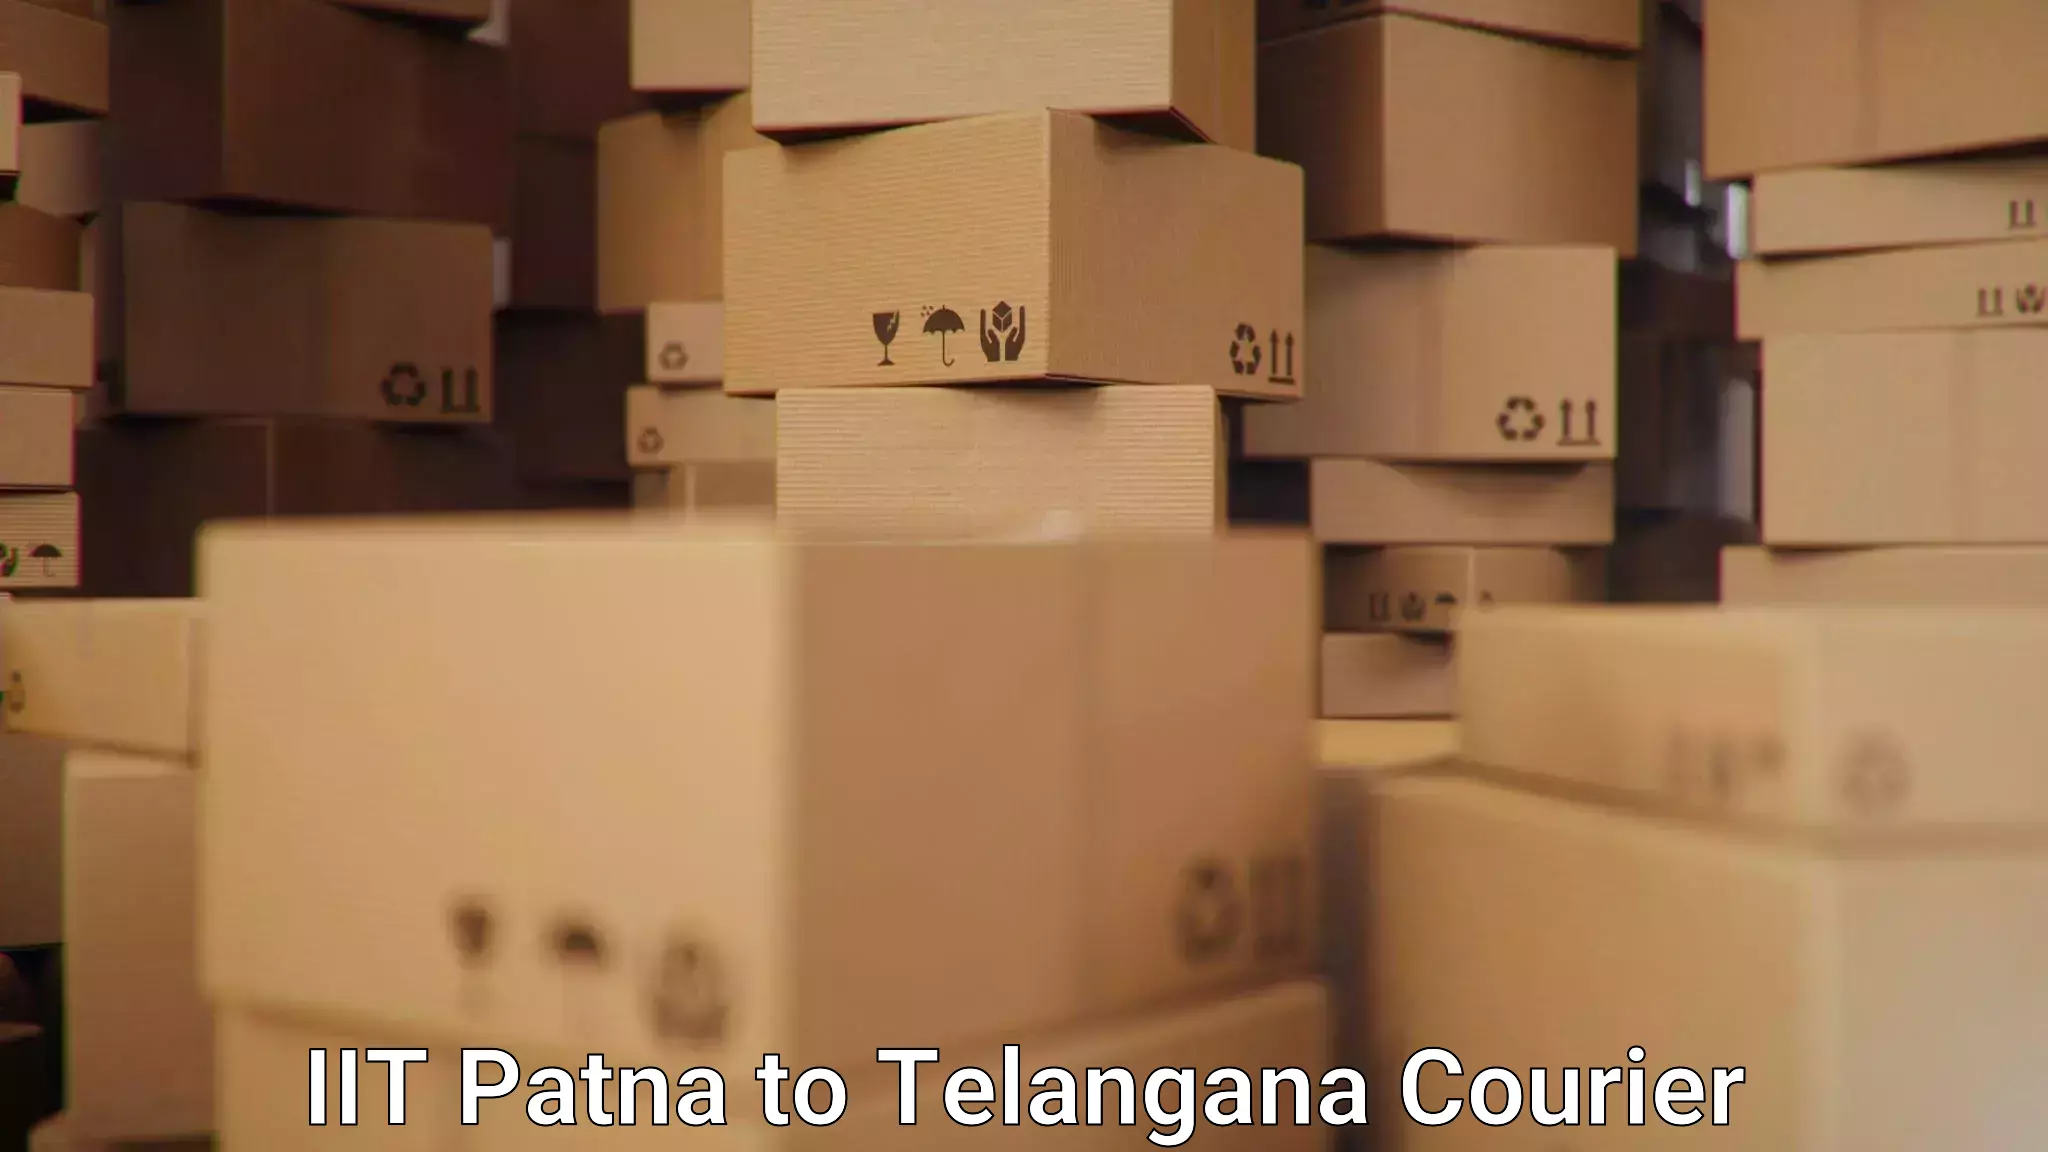 Multi-city courier IIT Patna to Rudrangi